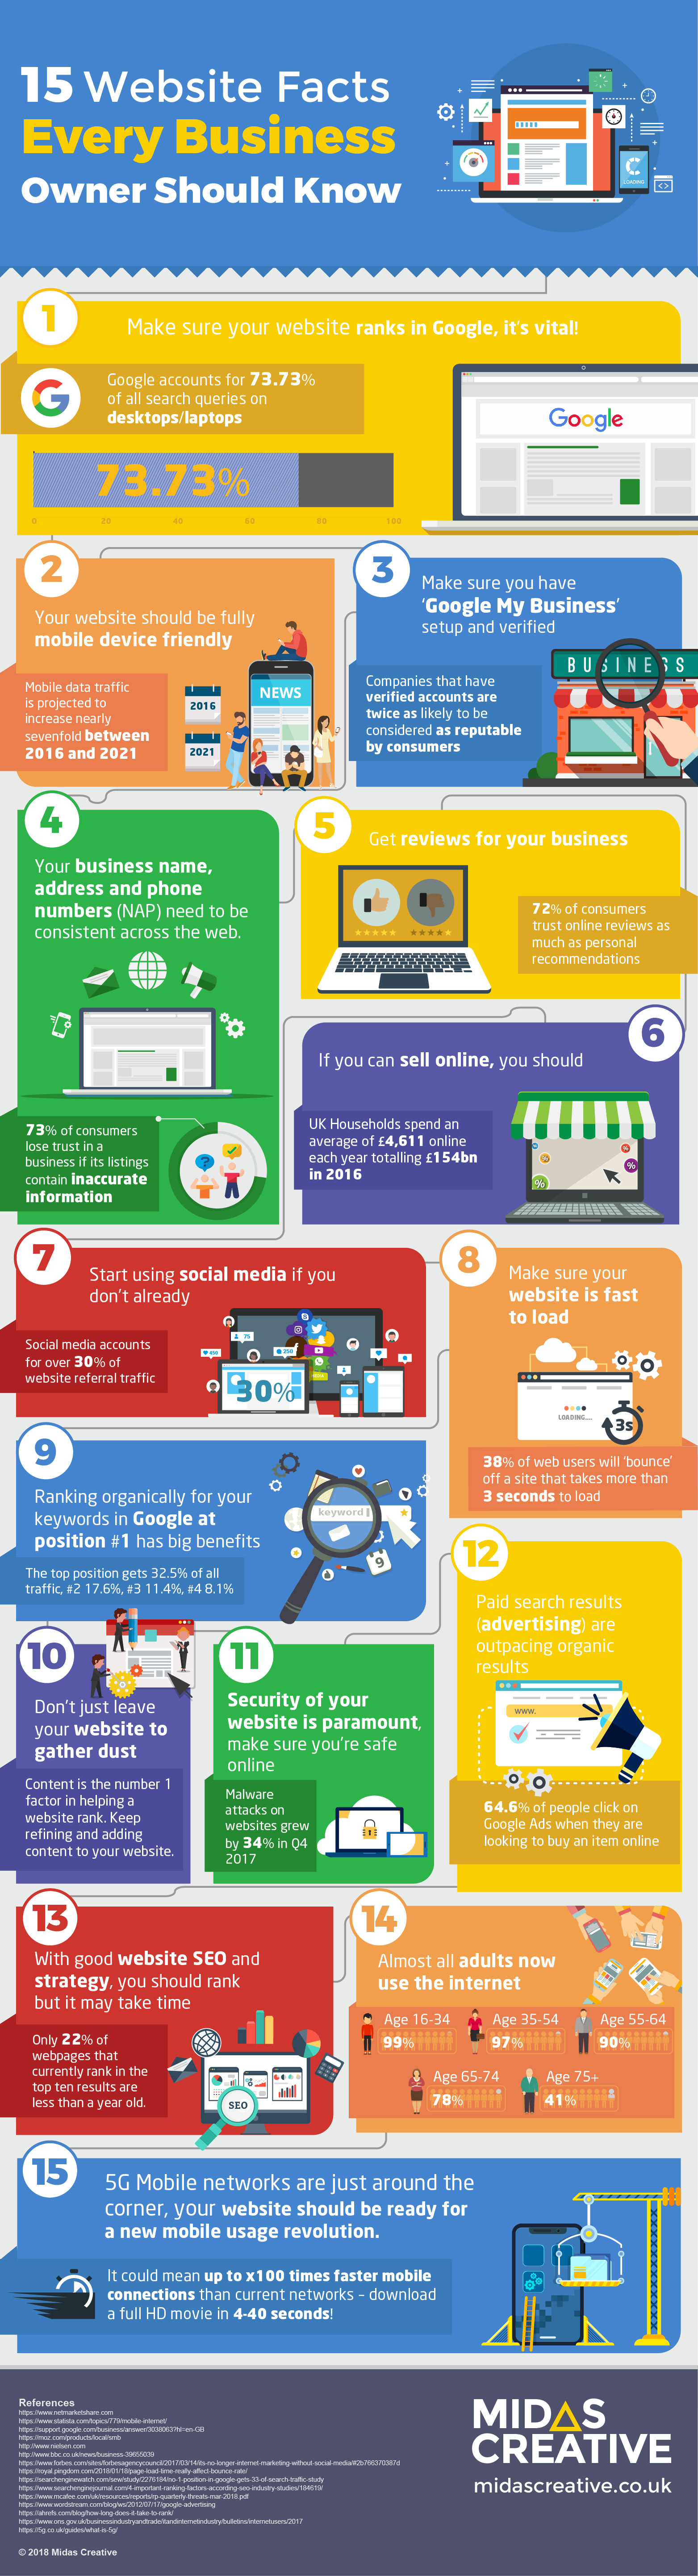 15 Website Facts Every Business Owner Should Know